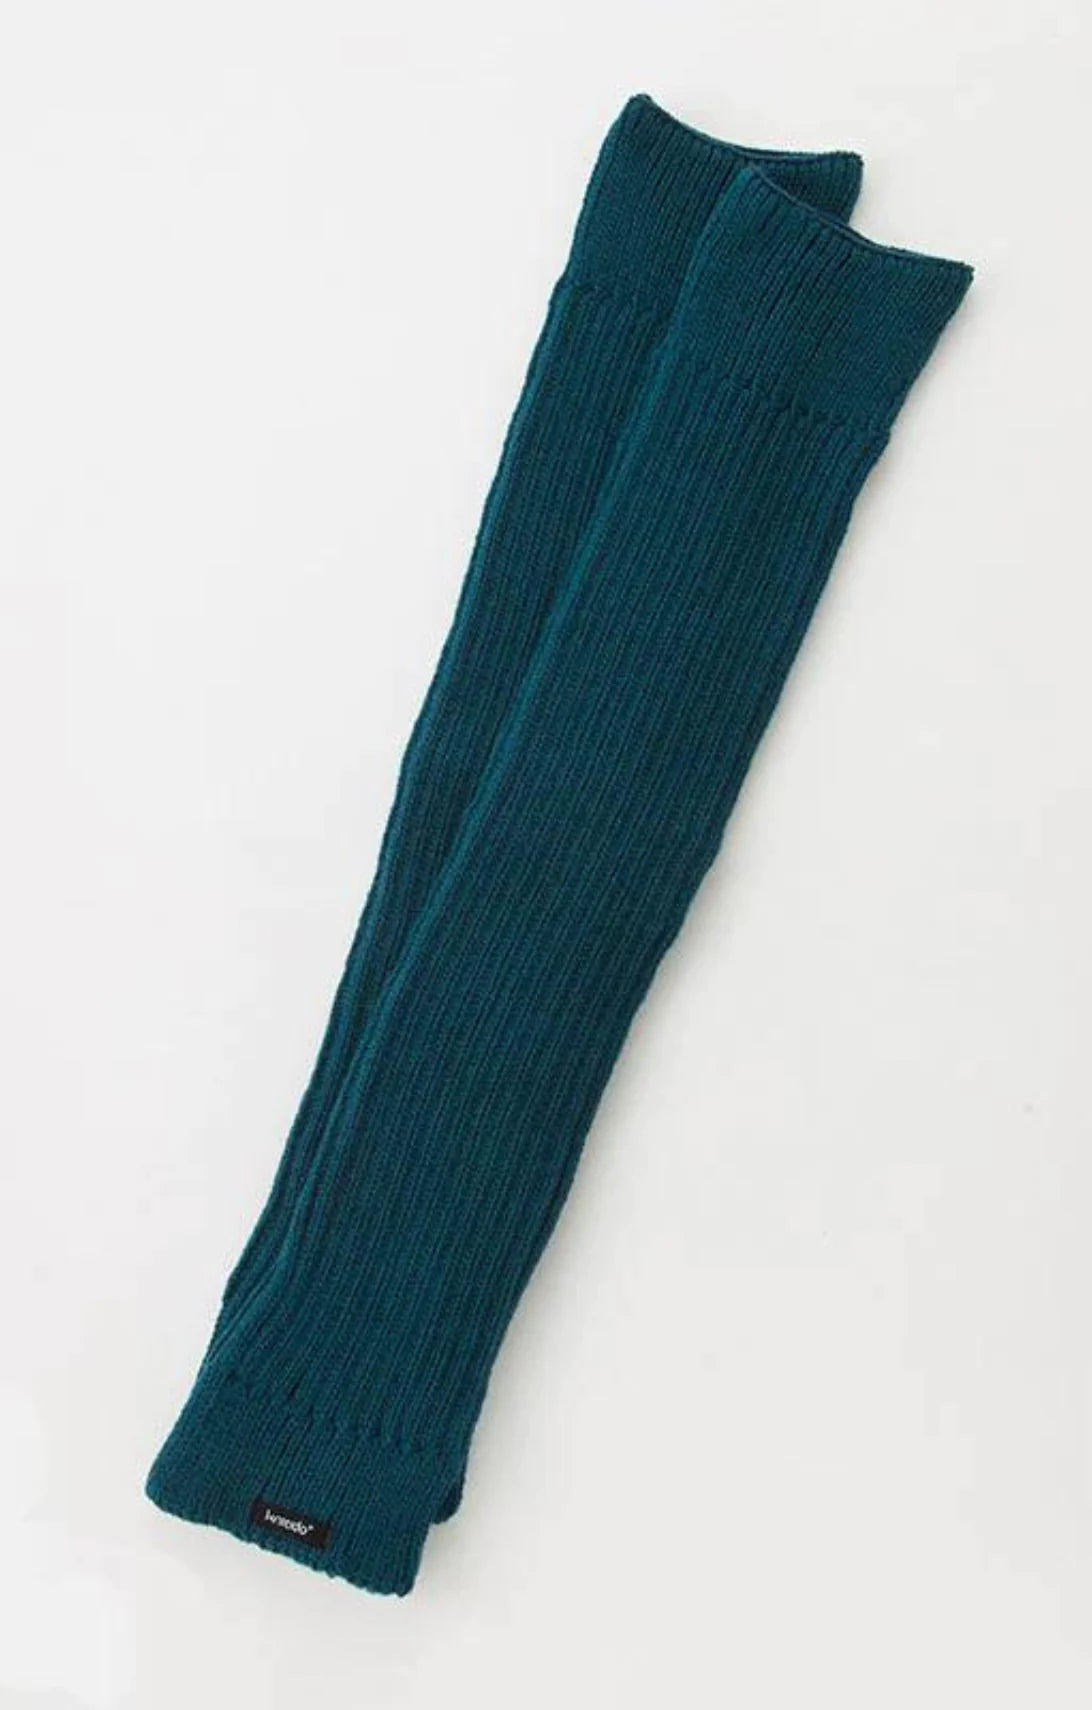 Knitido plus brand Wool Blend Ribbed Leg Warmer in Teal color